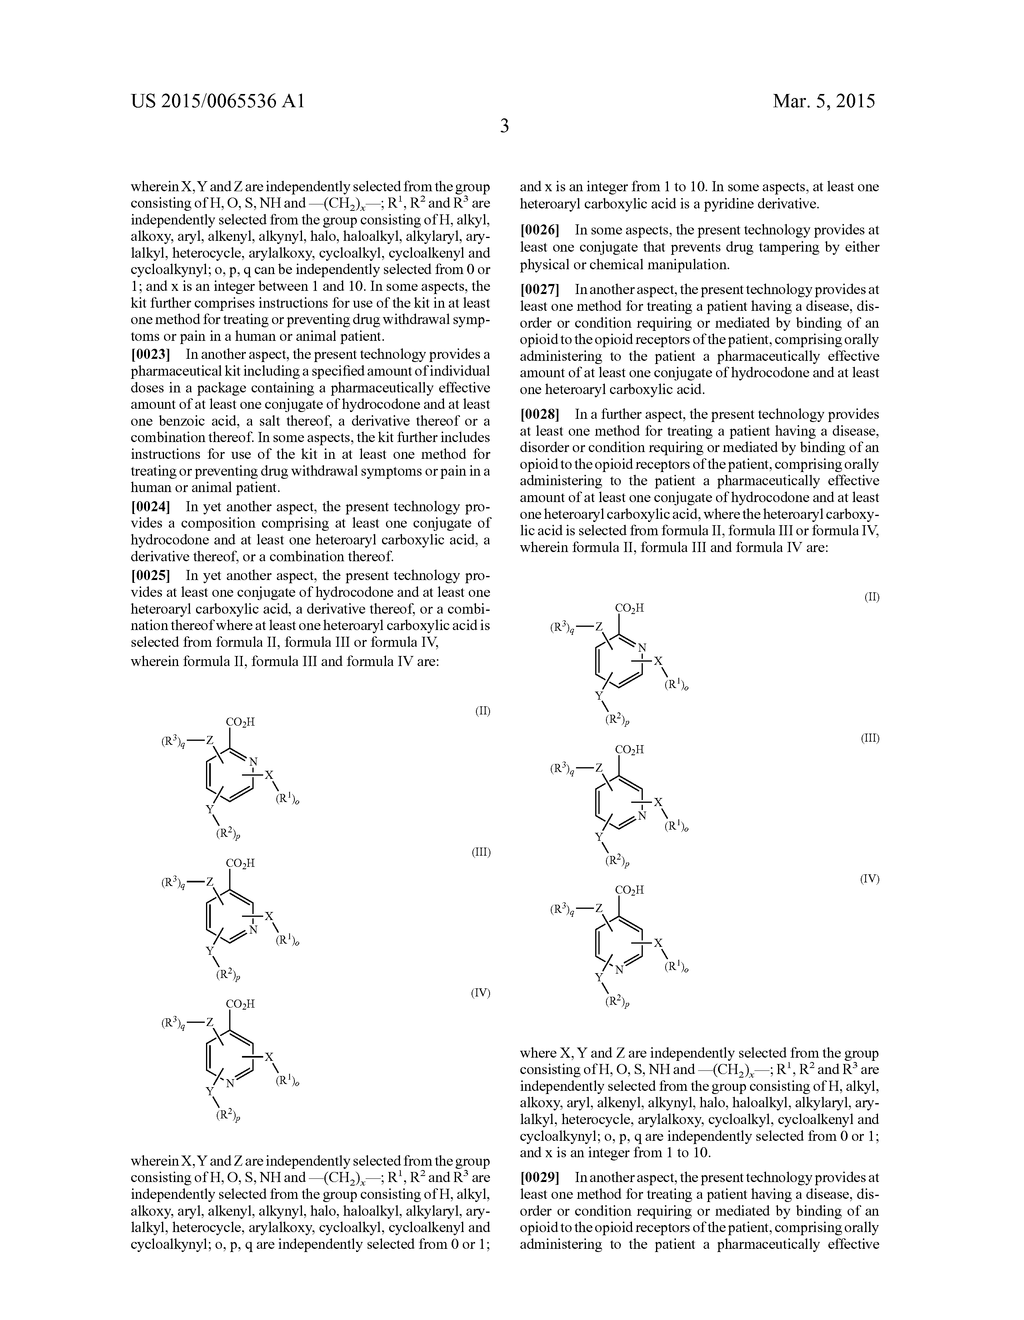 Benzoic Acid, Benzoic Acid Derivatives and Heteroaryl Carboxylic Acid     Conjugates of Hydrocodone, Prodrugs, Methods of Making and Uses Thereof - diagram, schematic, and image 39